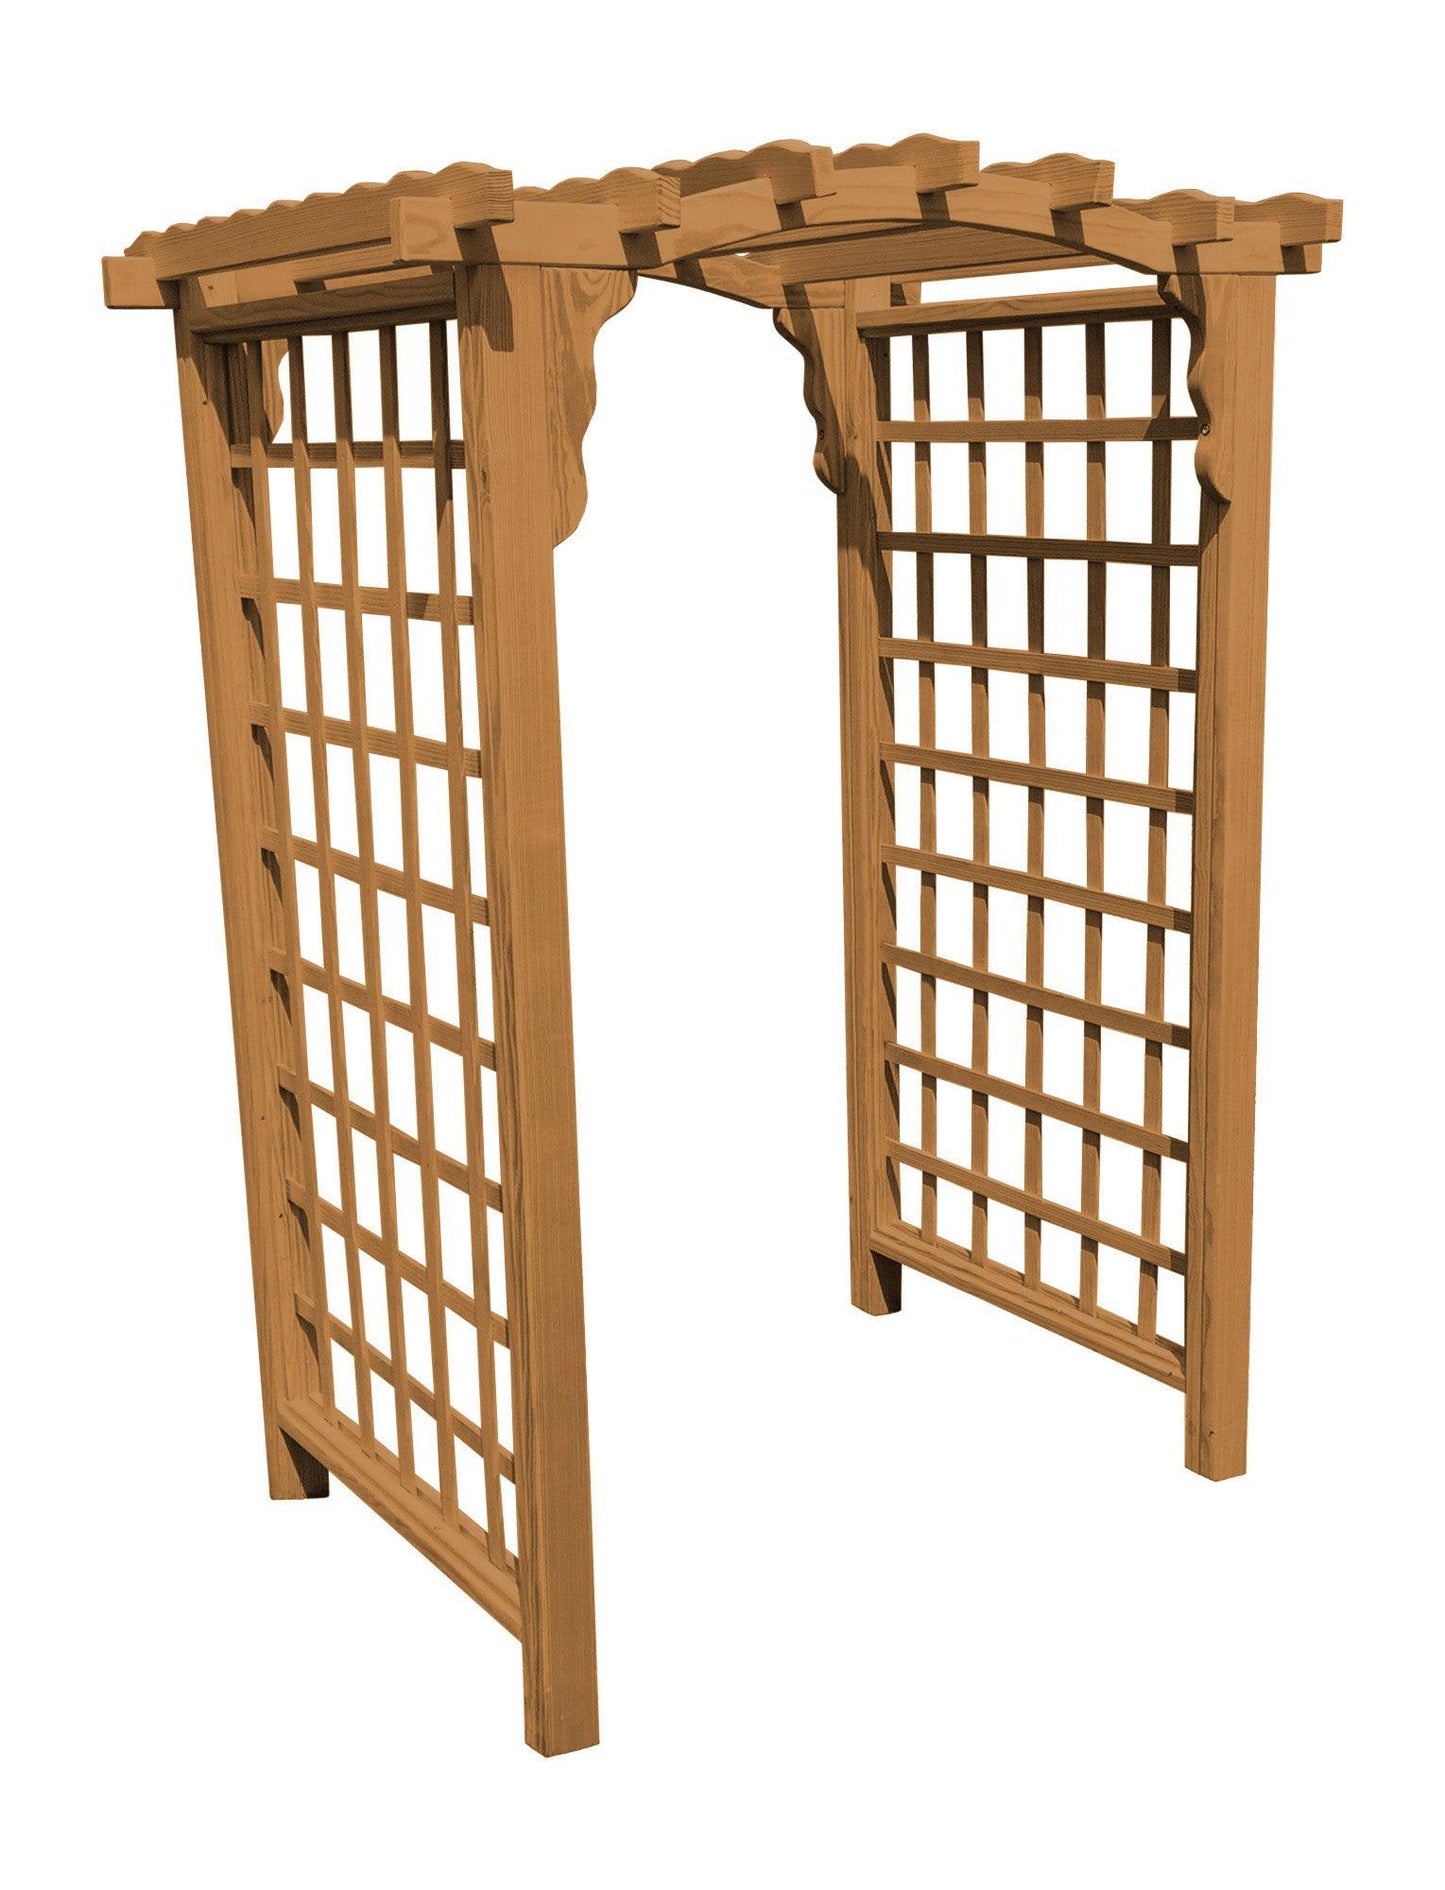 A&L FURNITURE CO. 5' Cambridge Pressure Treated Pine Arbor - LEAD TIME TO SHIP 10 BUSINESS DAYS